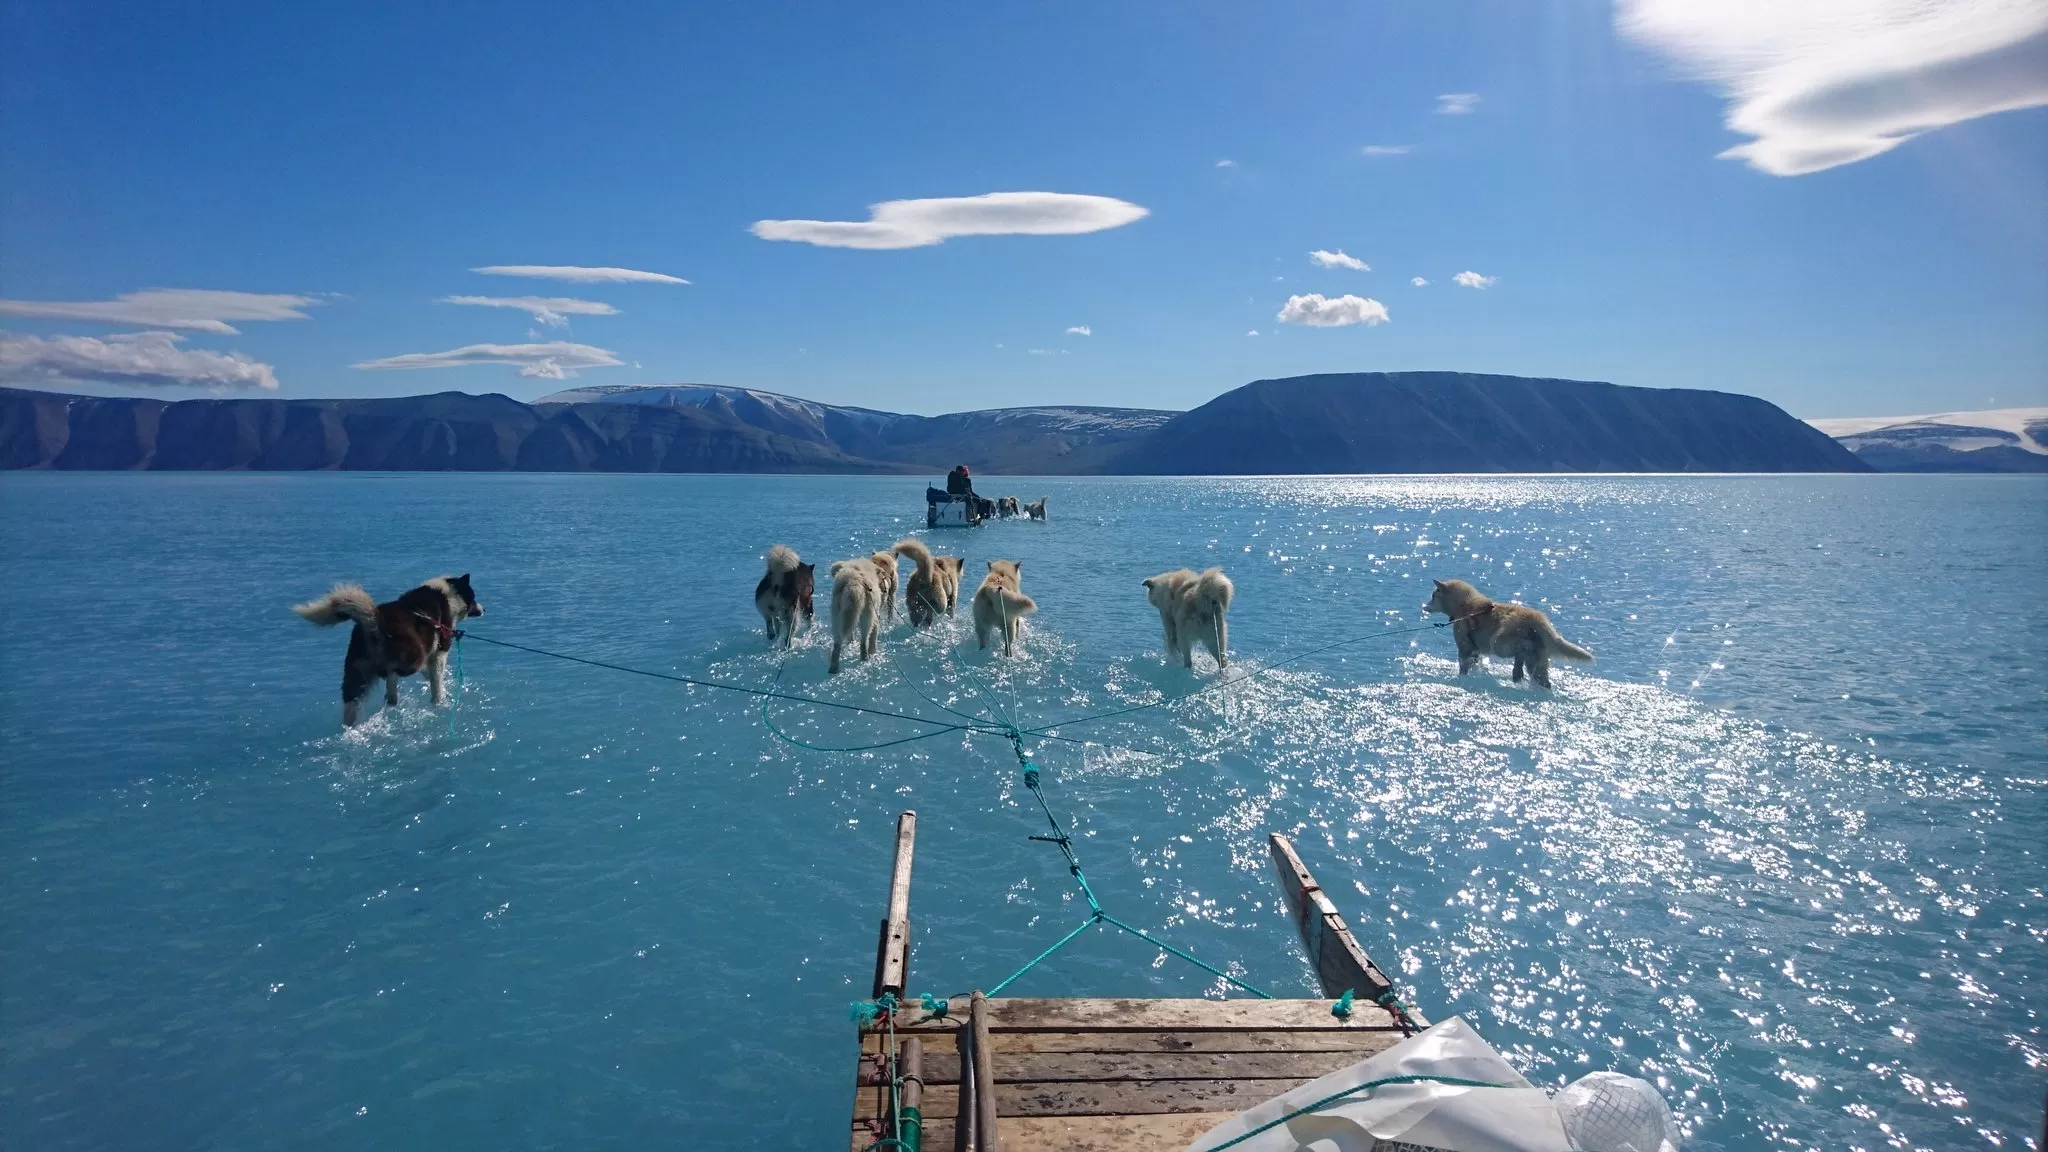 Sled dogs pull a sled through water because all the ice has melted. Greenland